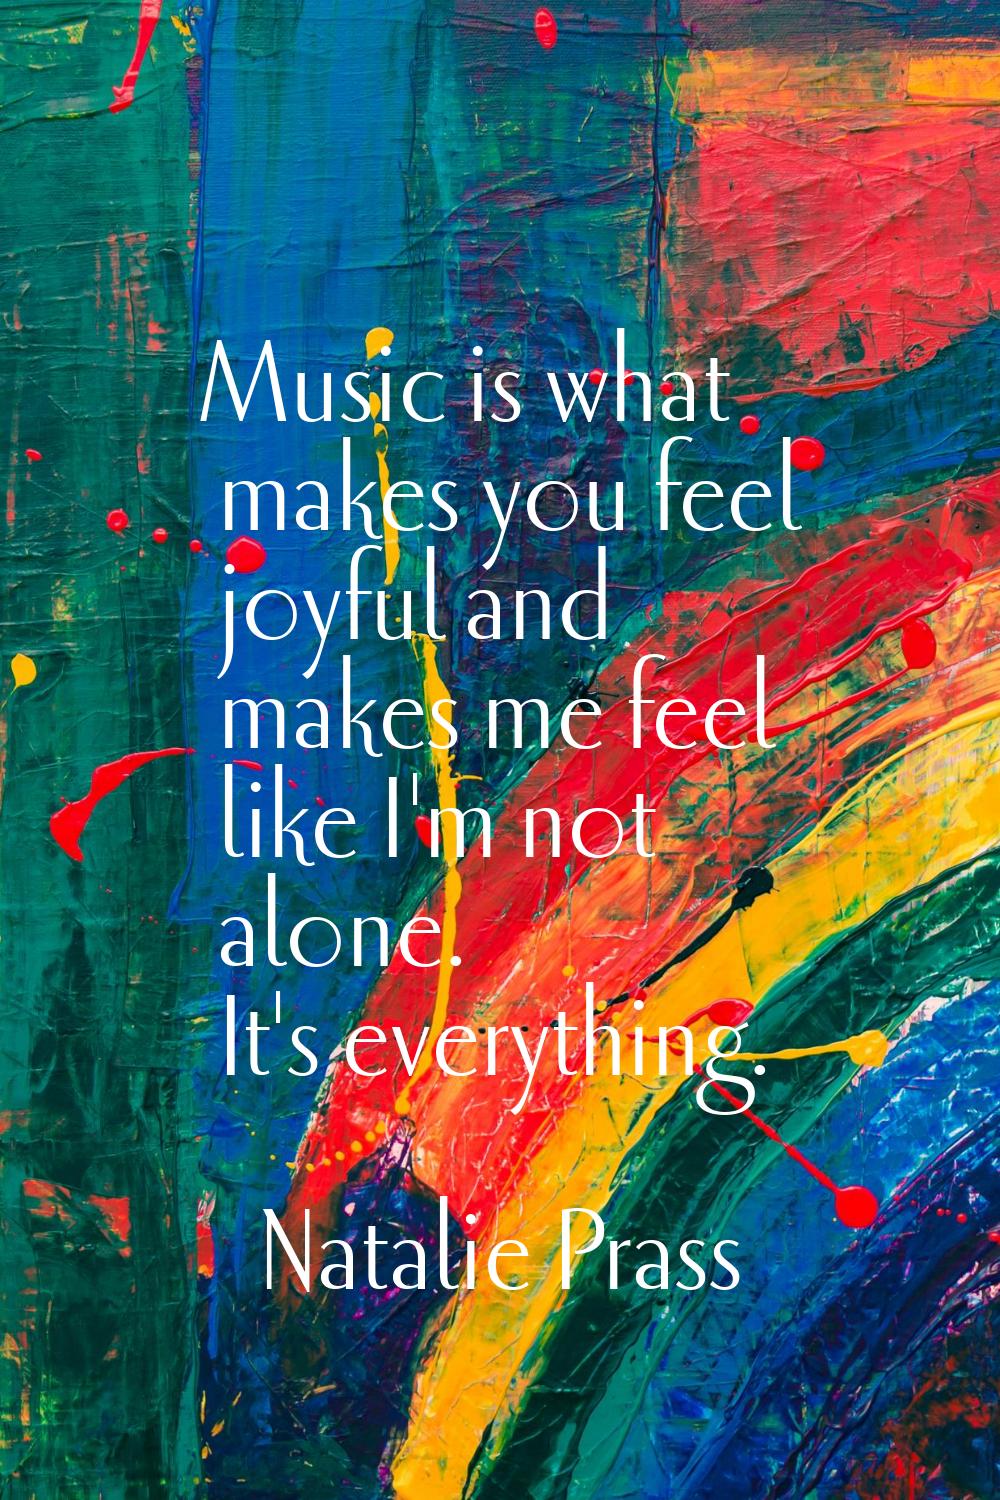 Music is what makes you feel joyful and makes me feel like I'm not alone. It's everything.